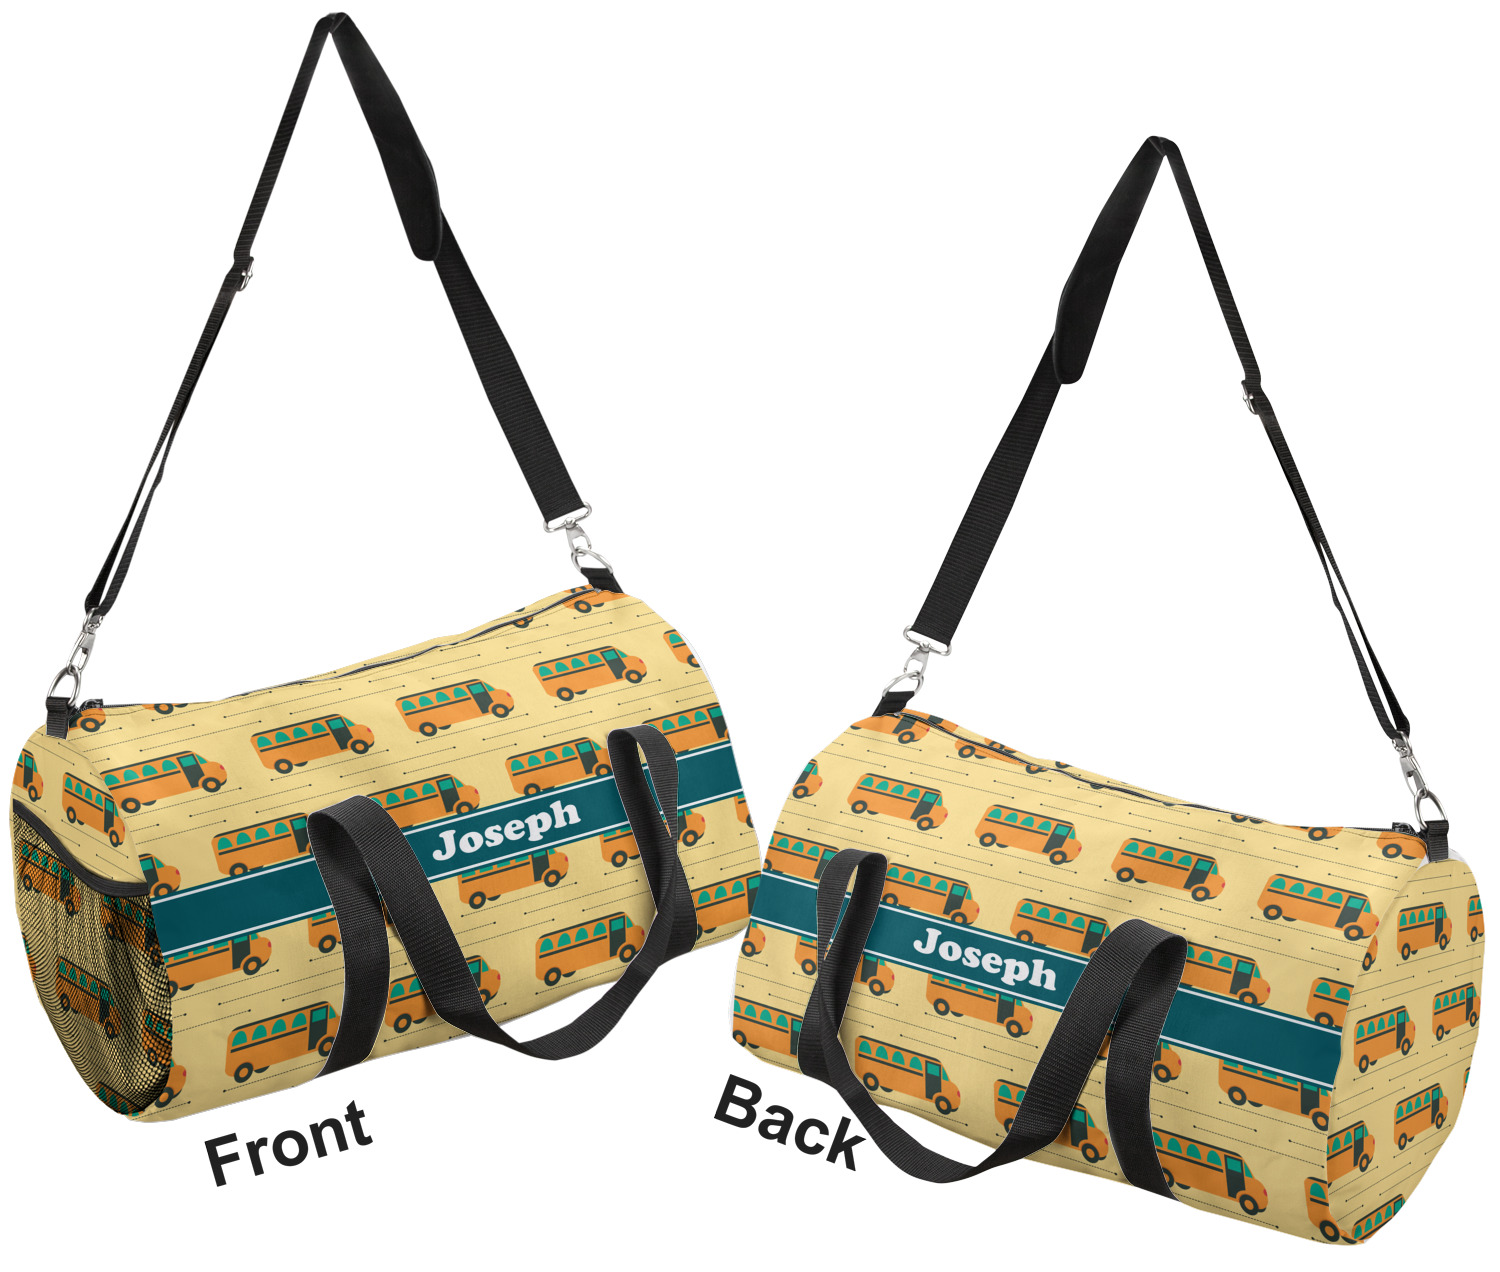 School Bus Duffel Bag - Small (Personalized) - YouCustomizeIt